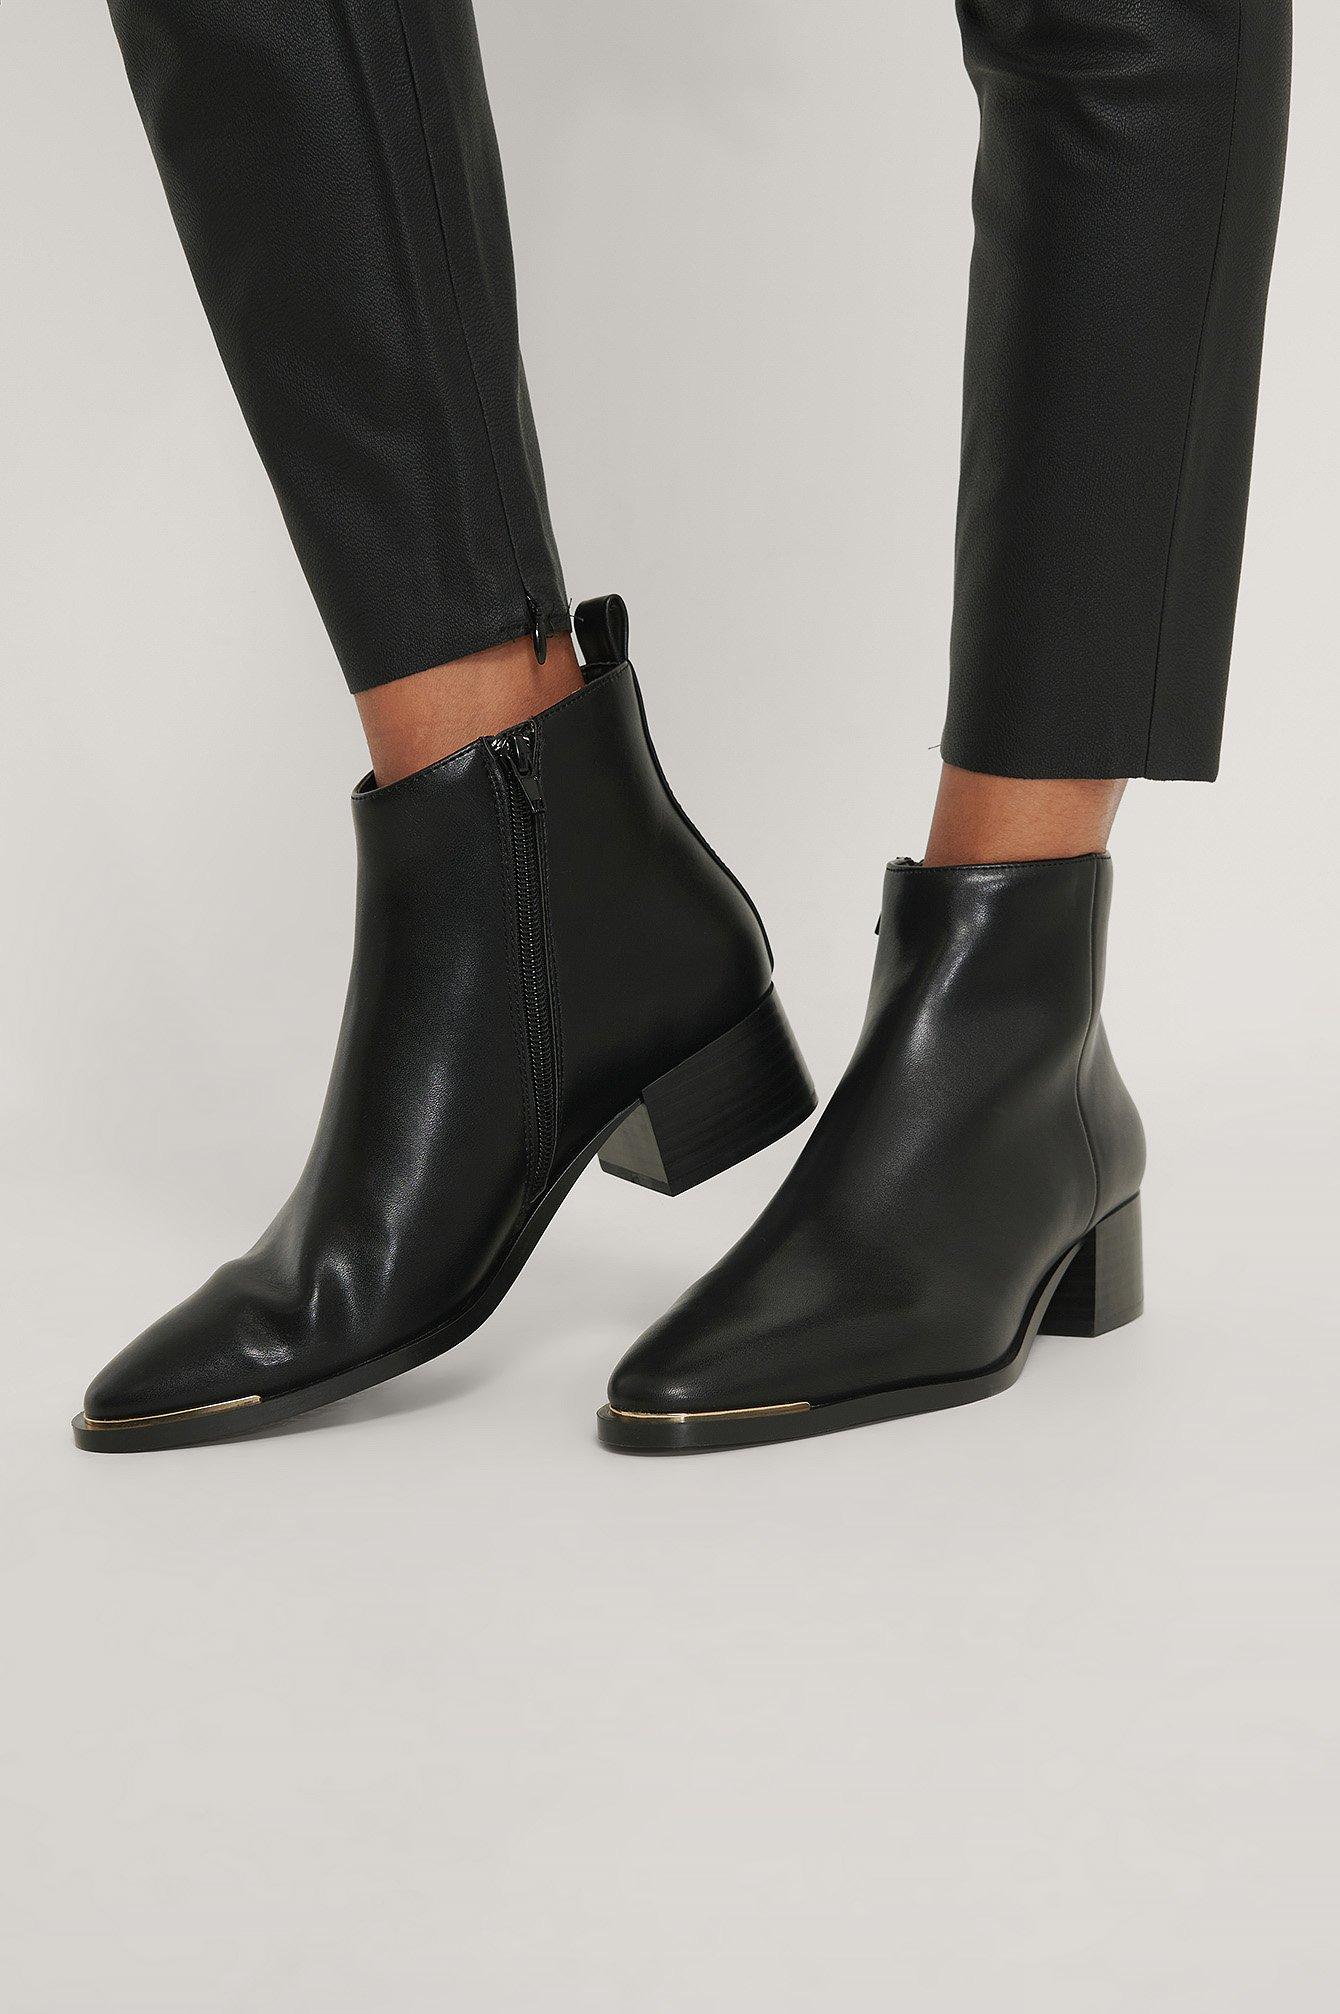 Mango Synthetic Black Minute Ankle Boots - Lyst